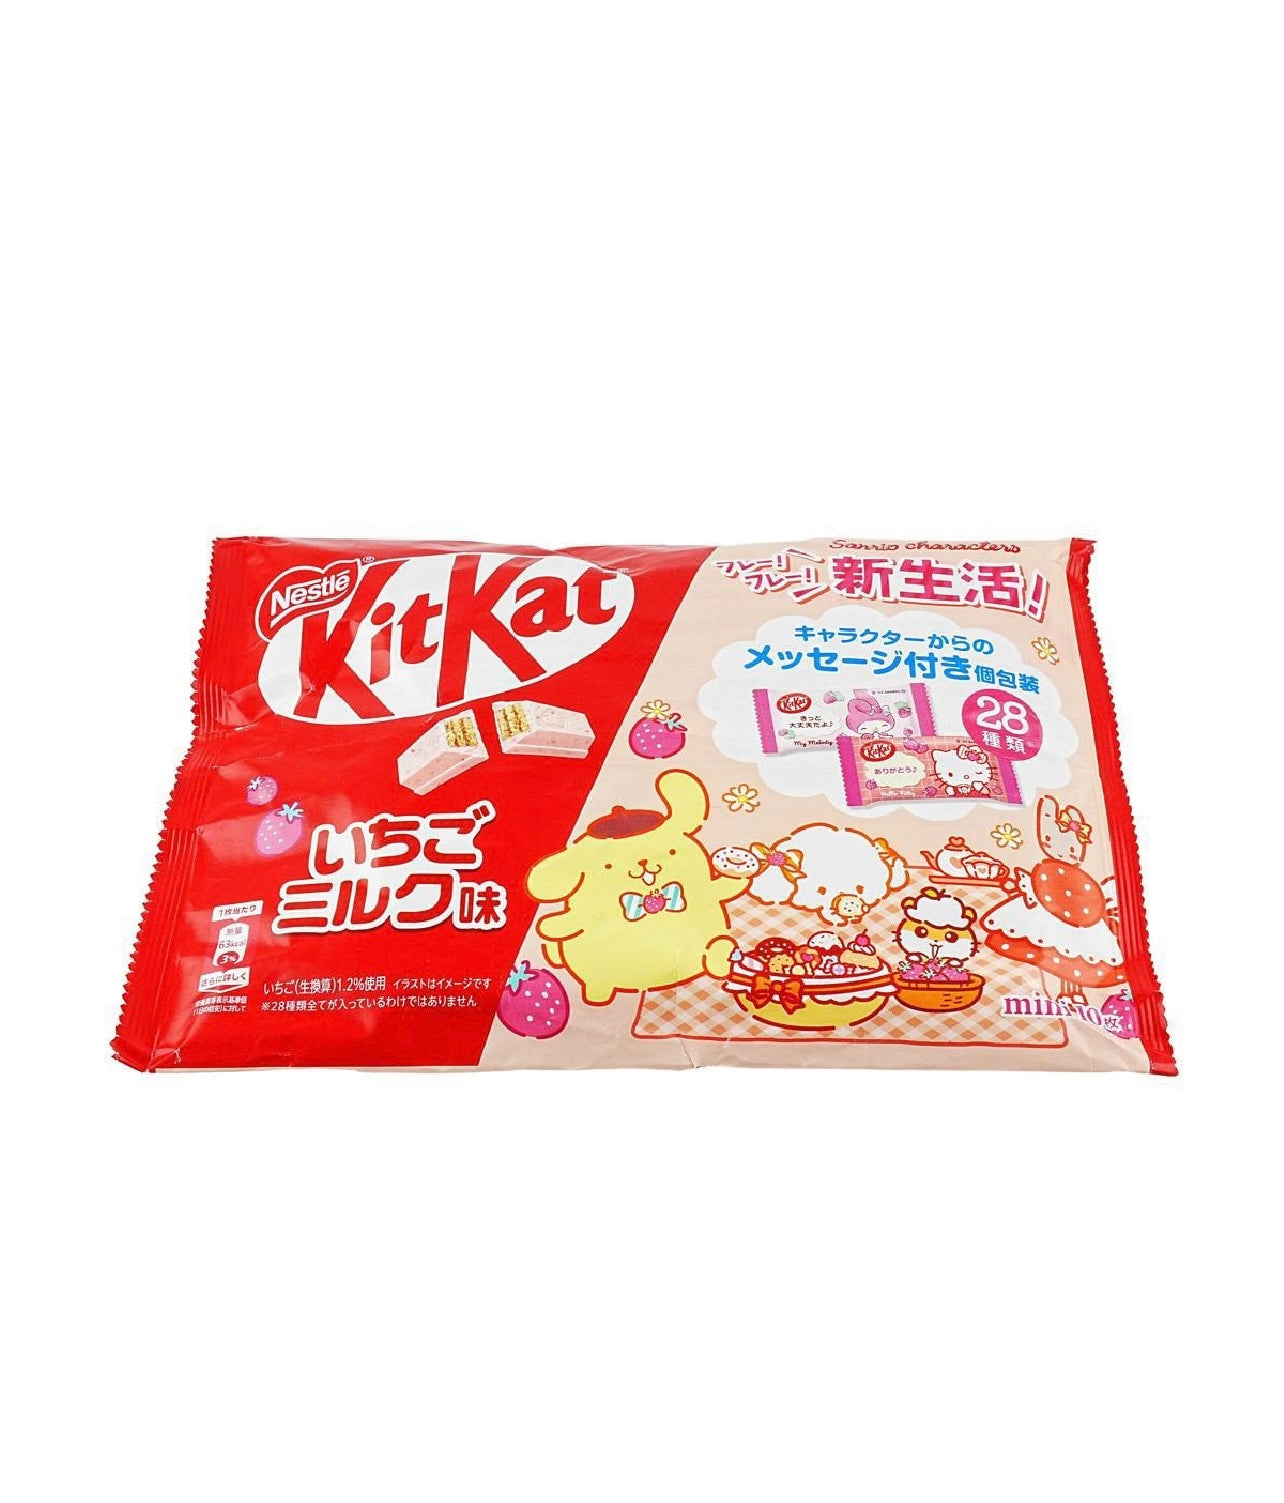 KitKat Strawberry Milk Flavored Waffle Cookies 10pieces 4.09 oz - Japan